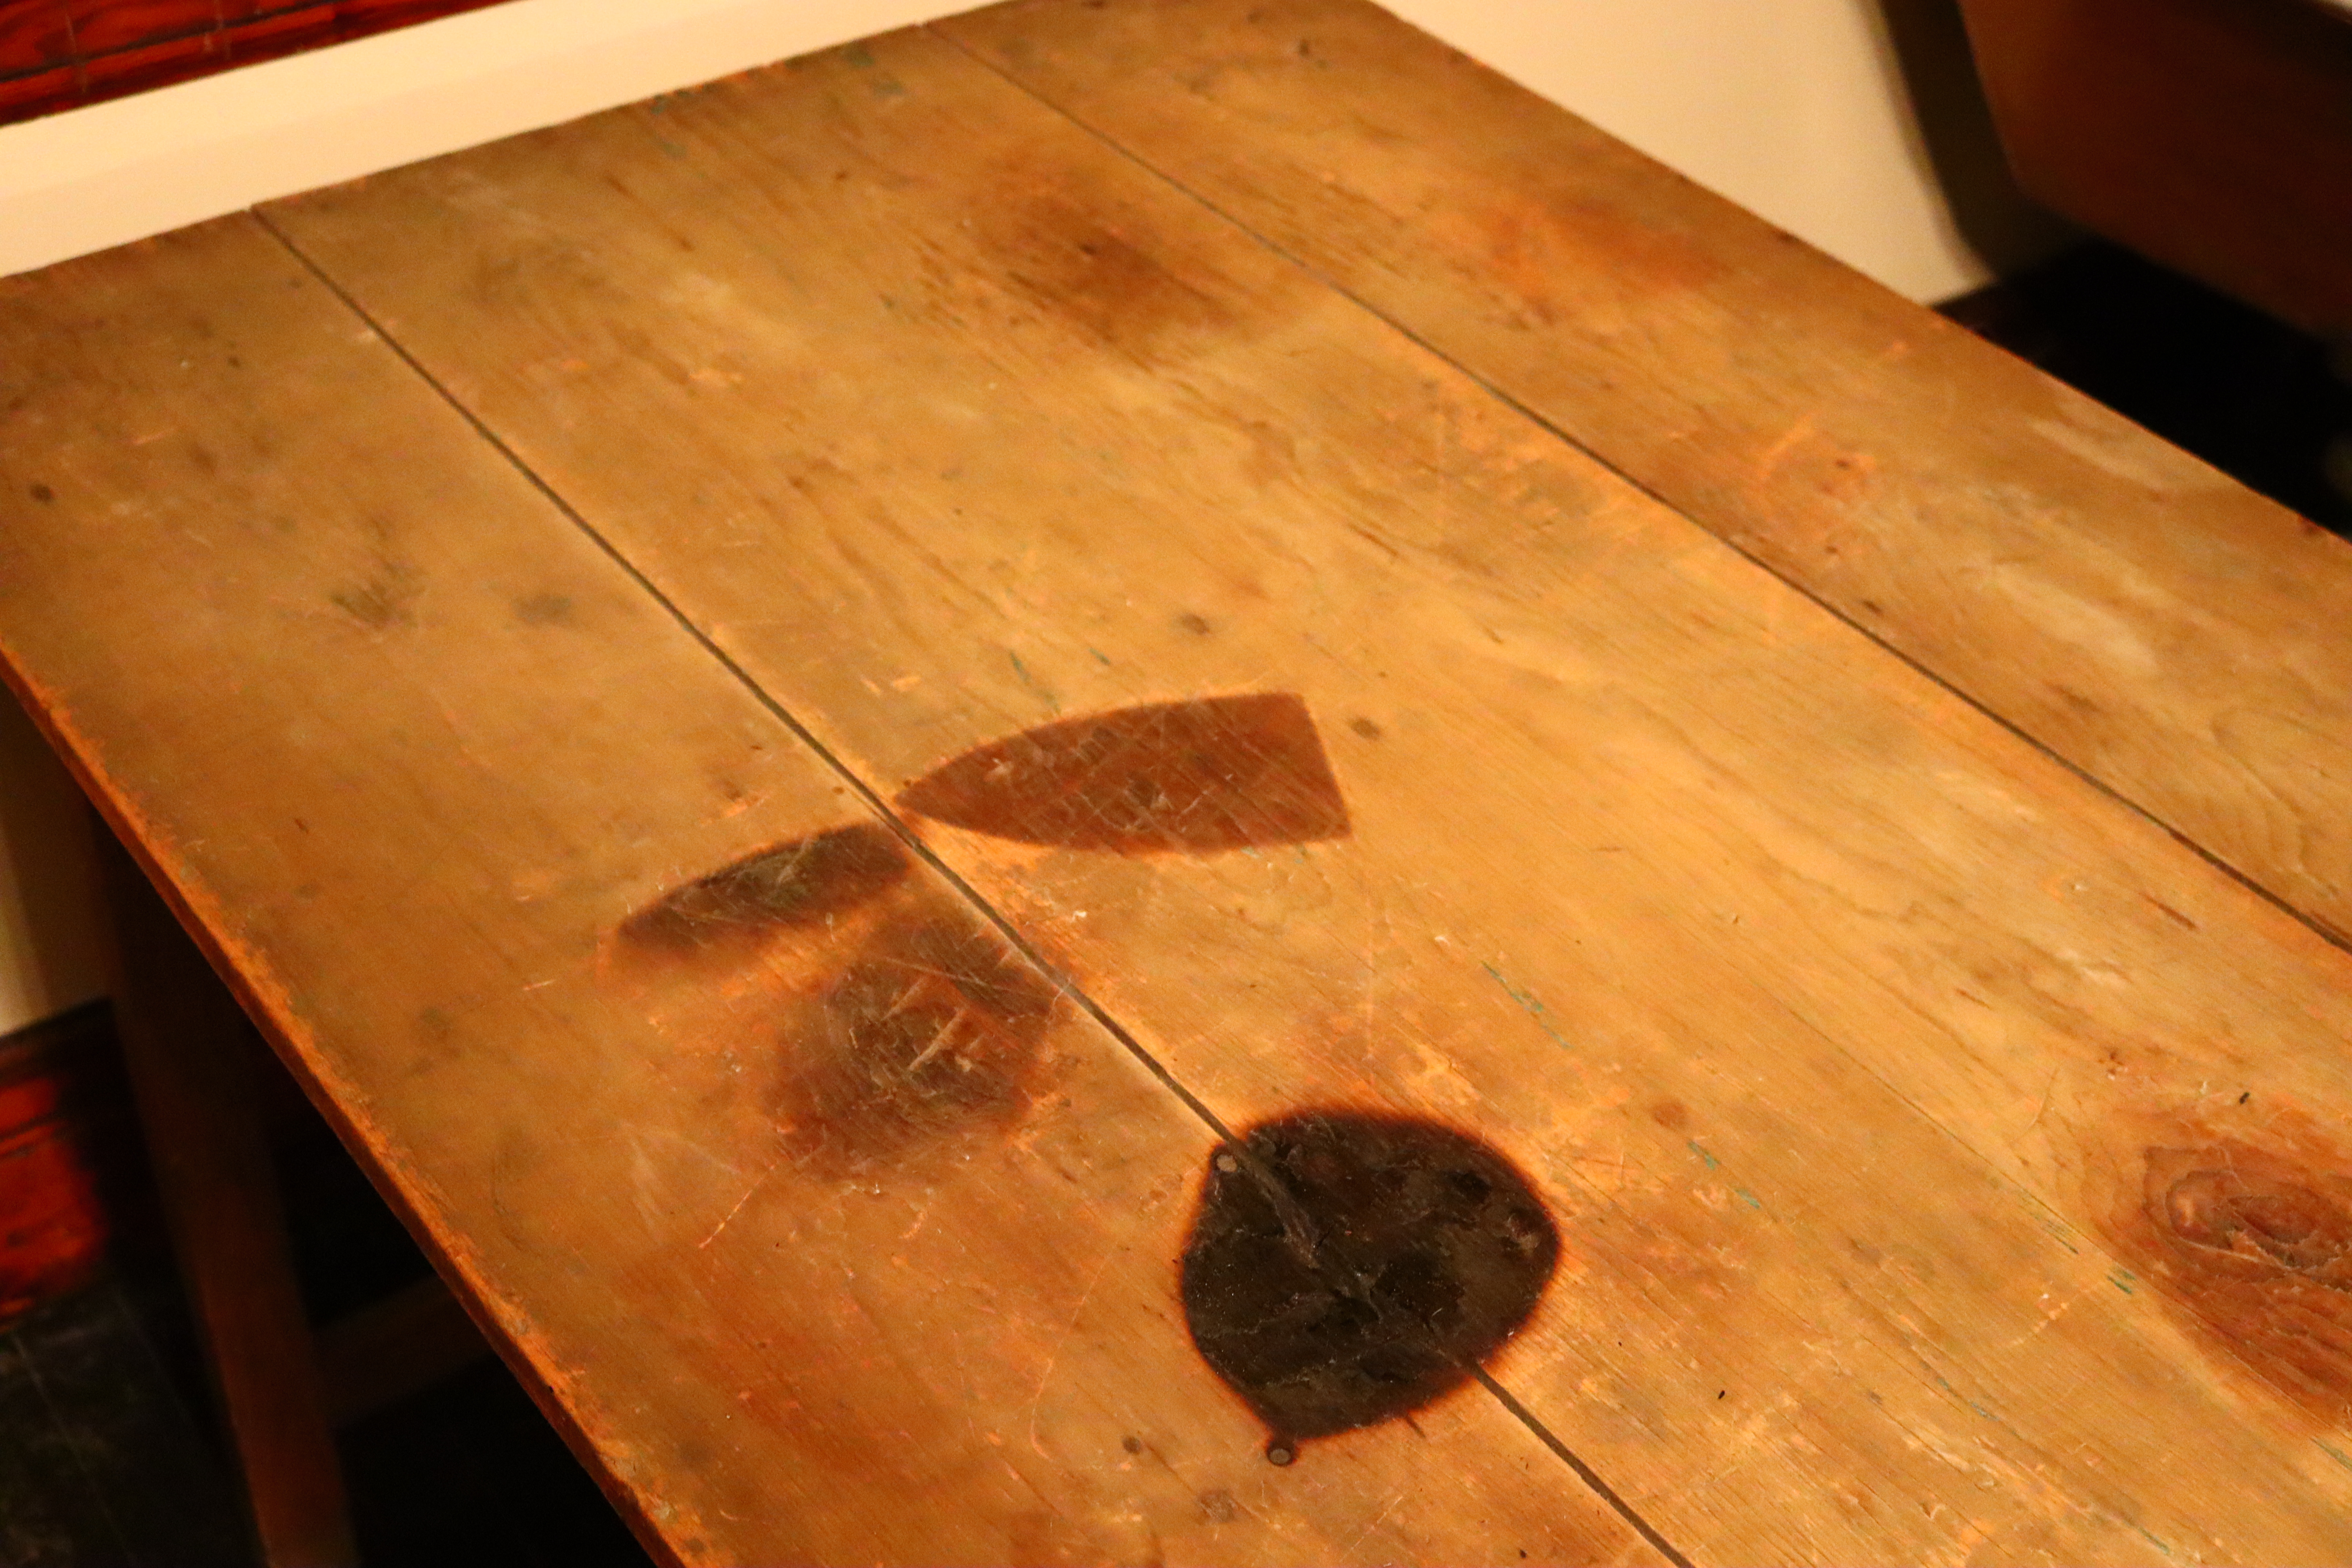 A wooden table with a scorch mark in the shape of a clothing iron.